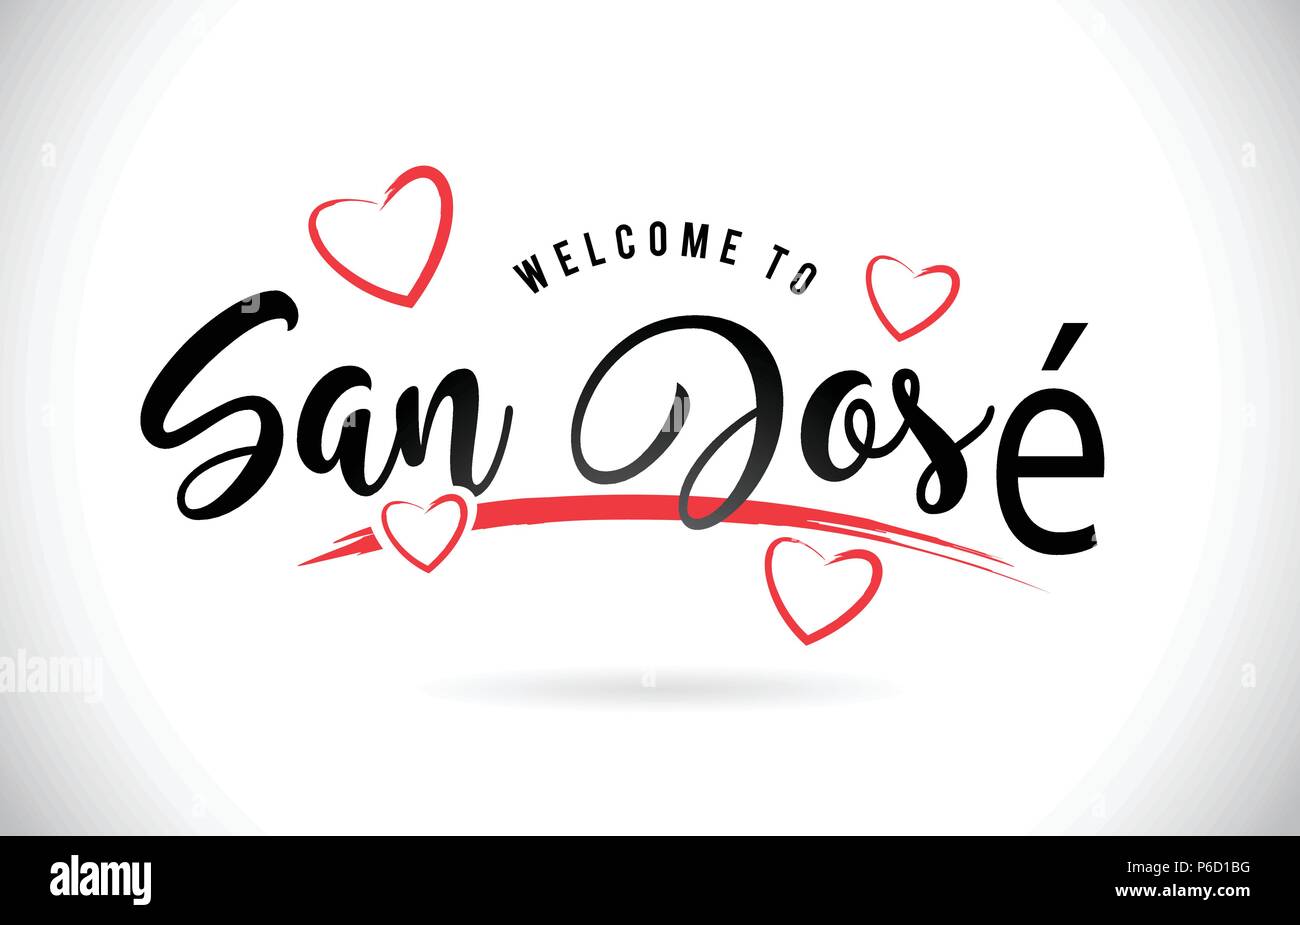 San José Welcome To Word Text with Handwritten Font and Red Love Hearts Vector Image Illustration Eps. Stock Vector